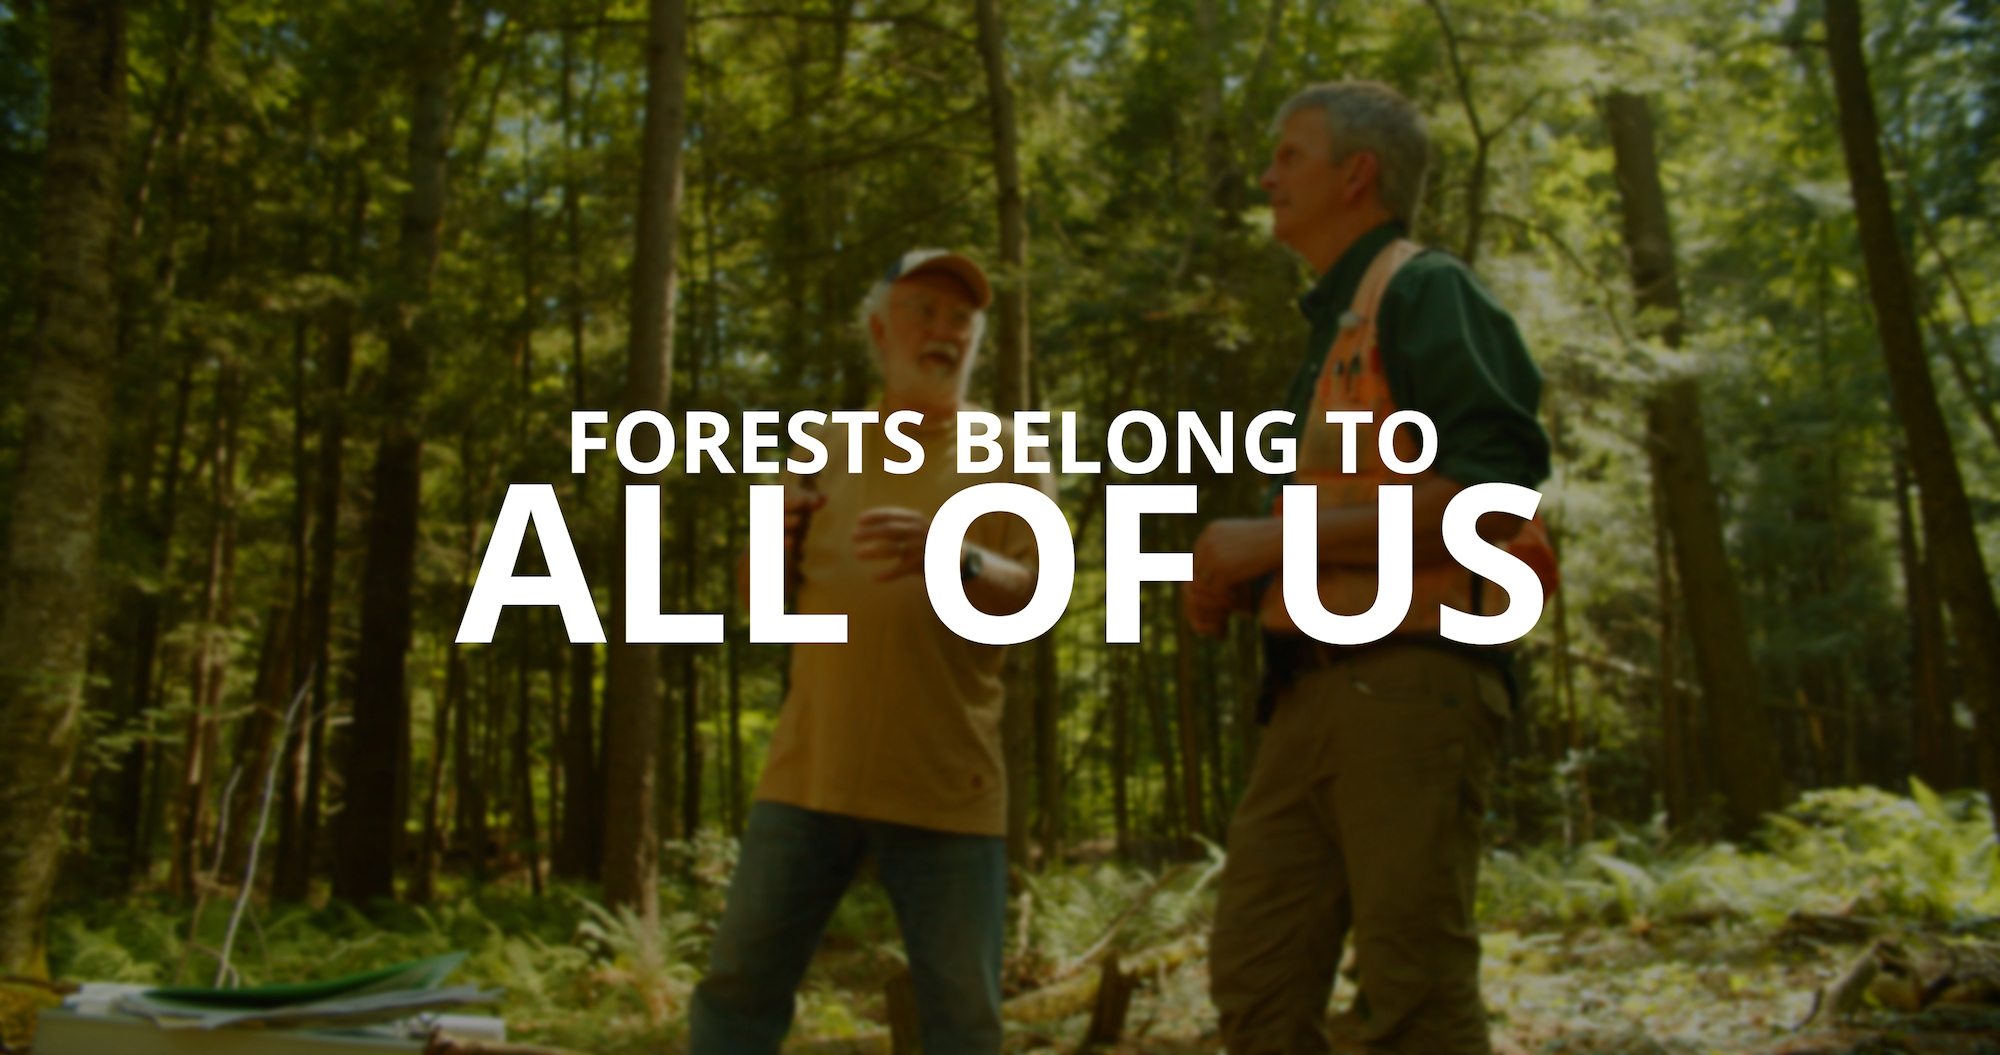 Text "Forests belong to all of us" over a picture of a forestland owner and professional forester talking in a forest clearing